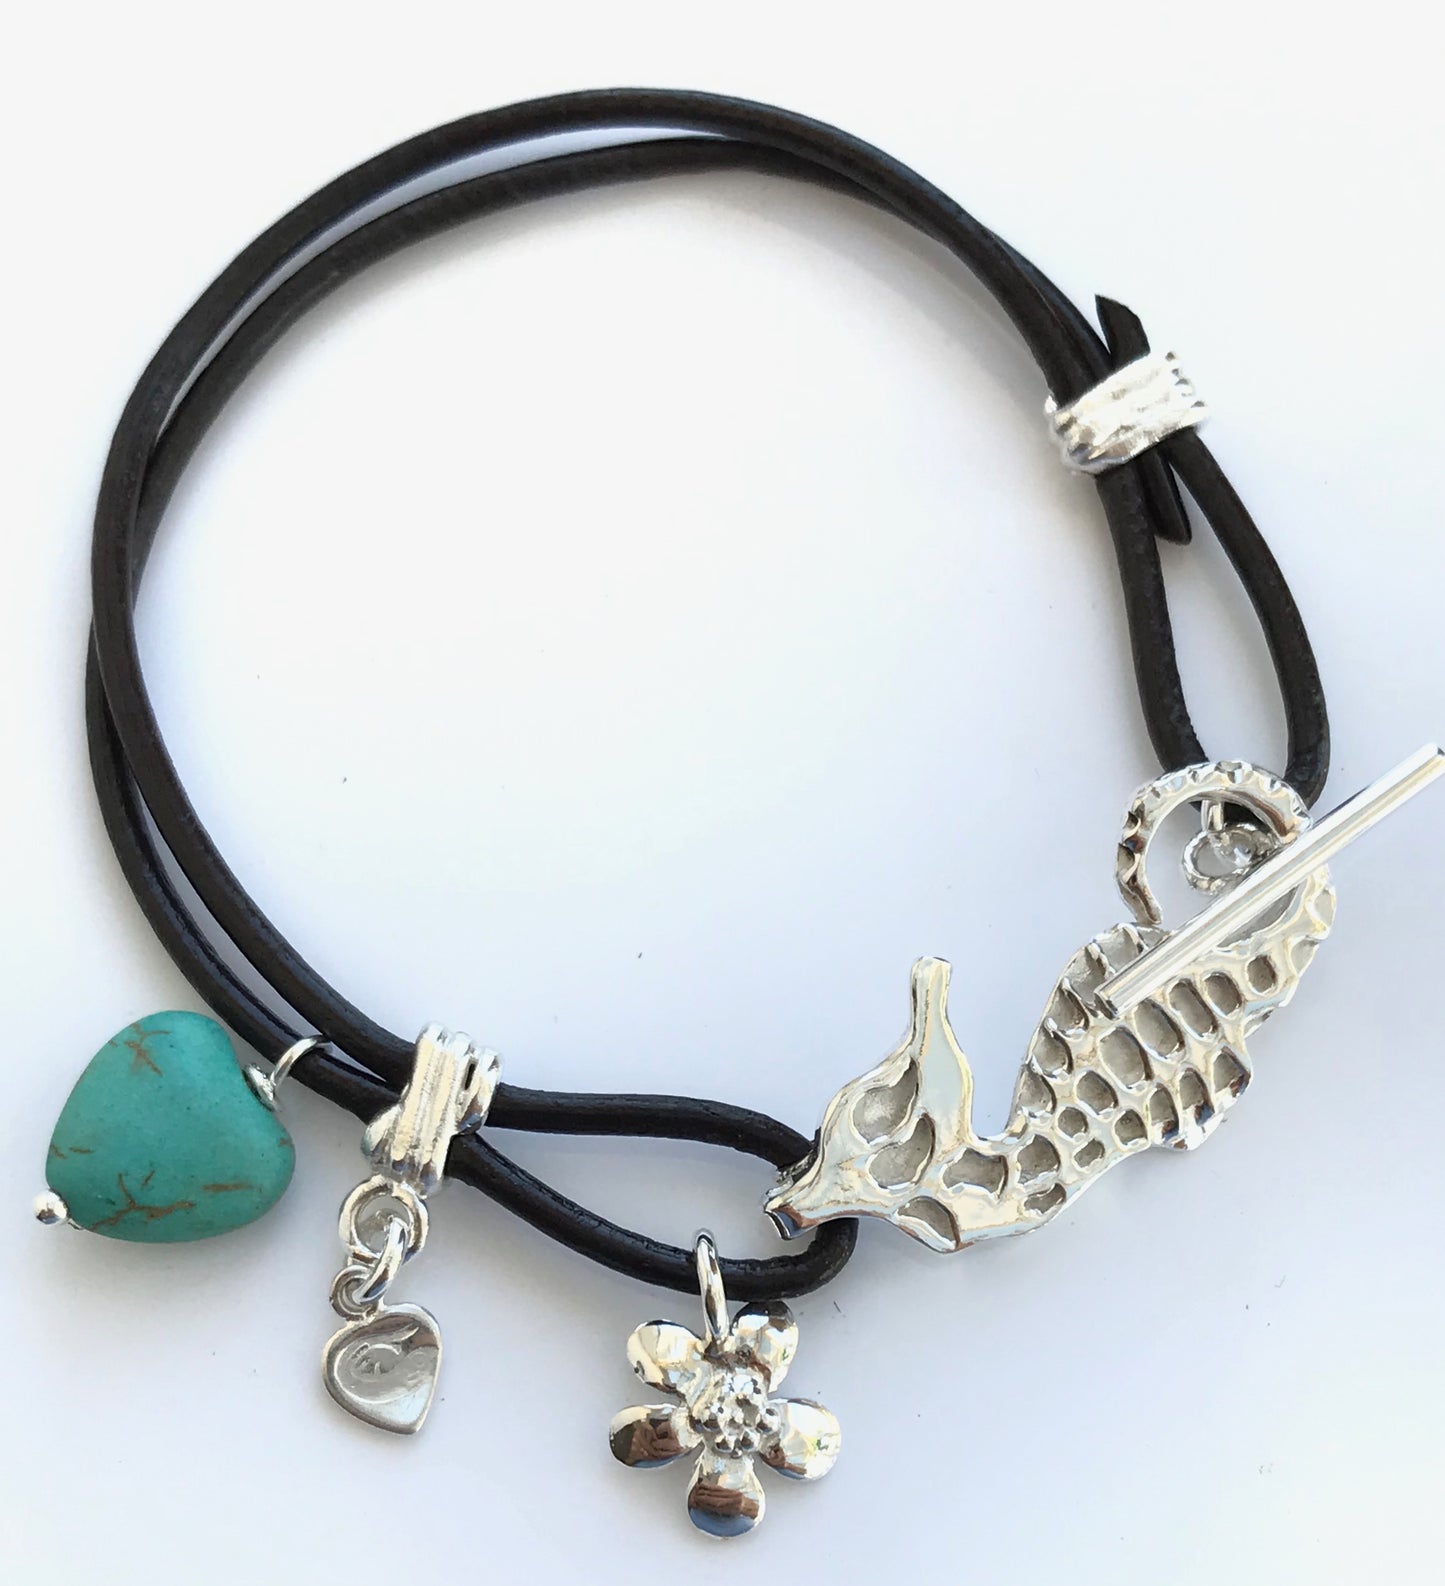 Seahorse bracelet with flower and turquoise bead